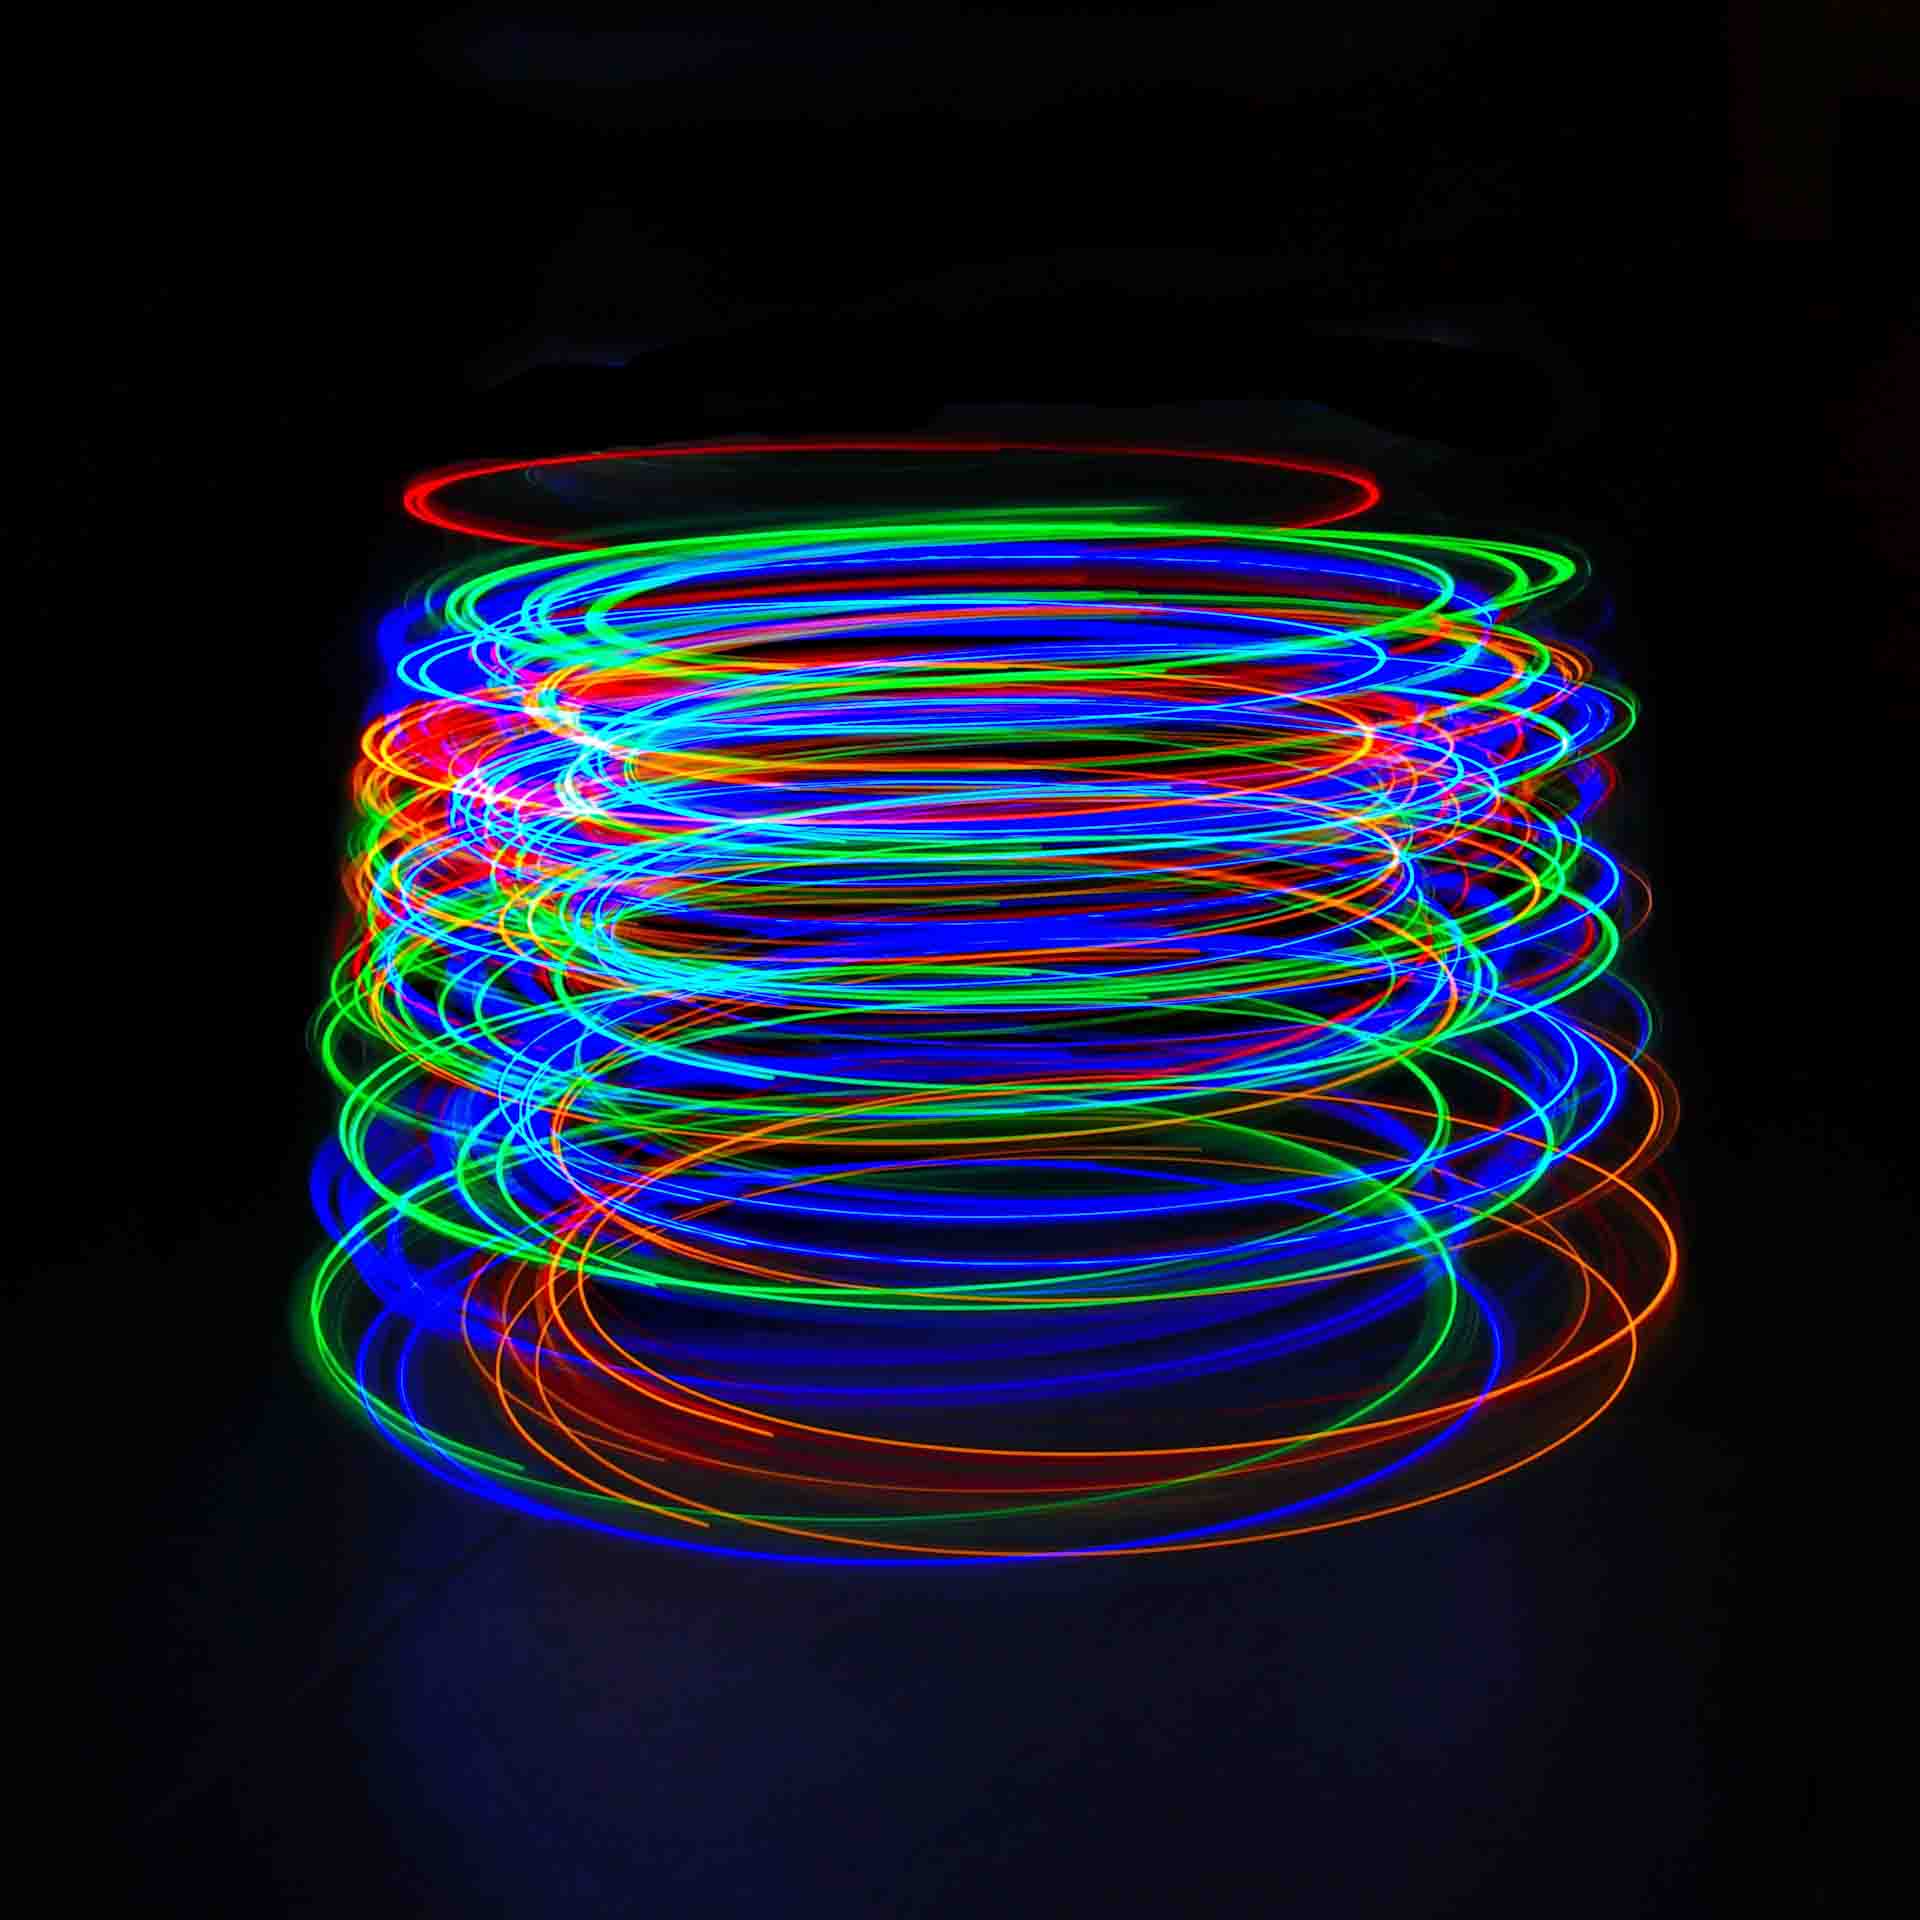 Lightpainting at home